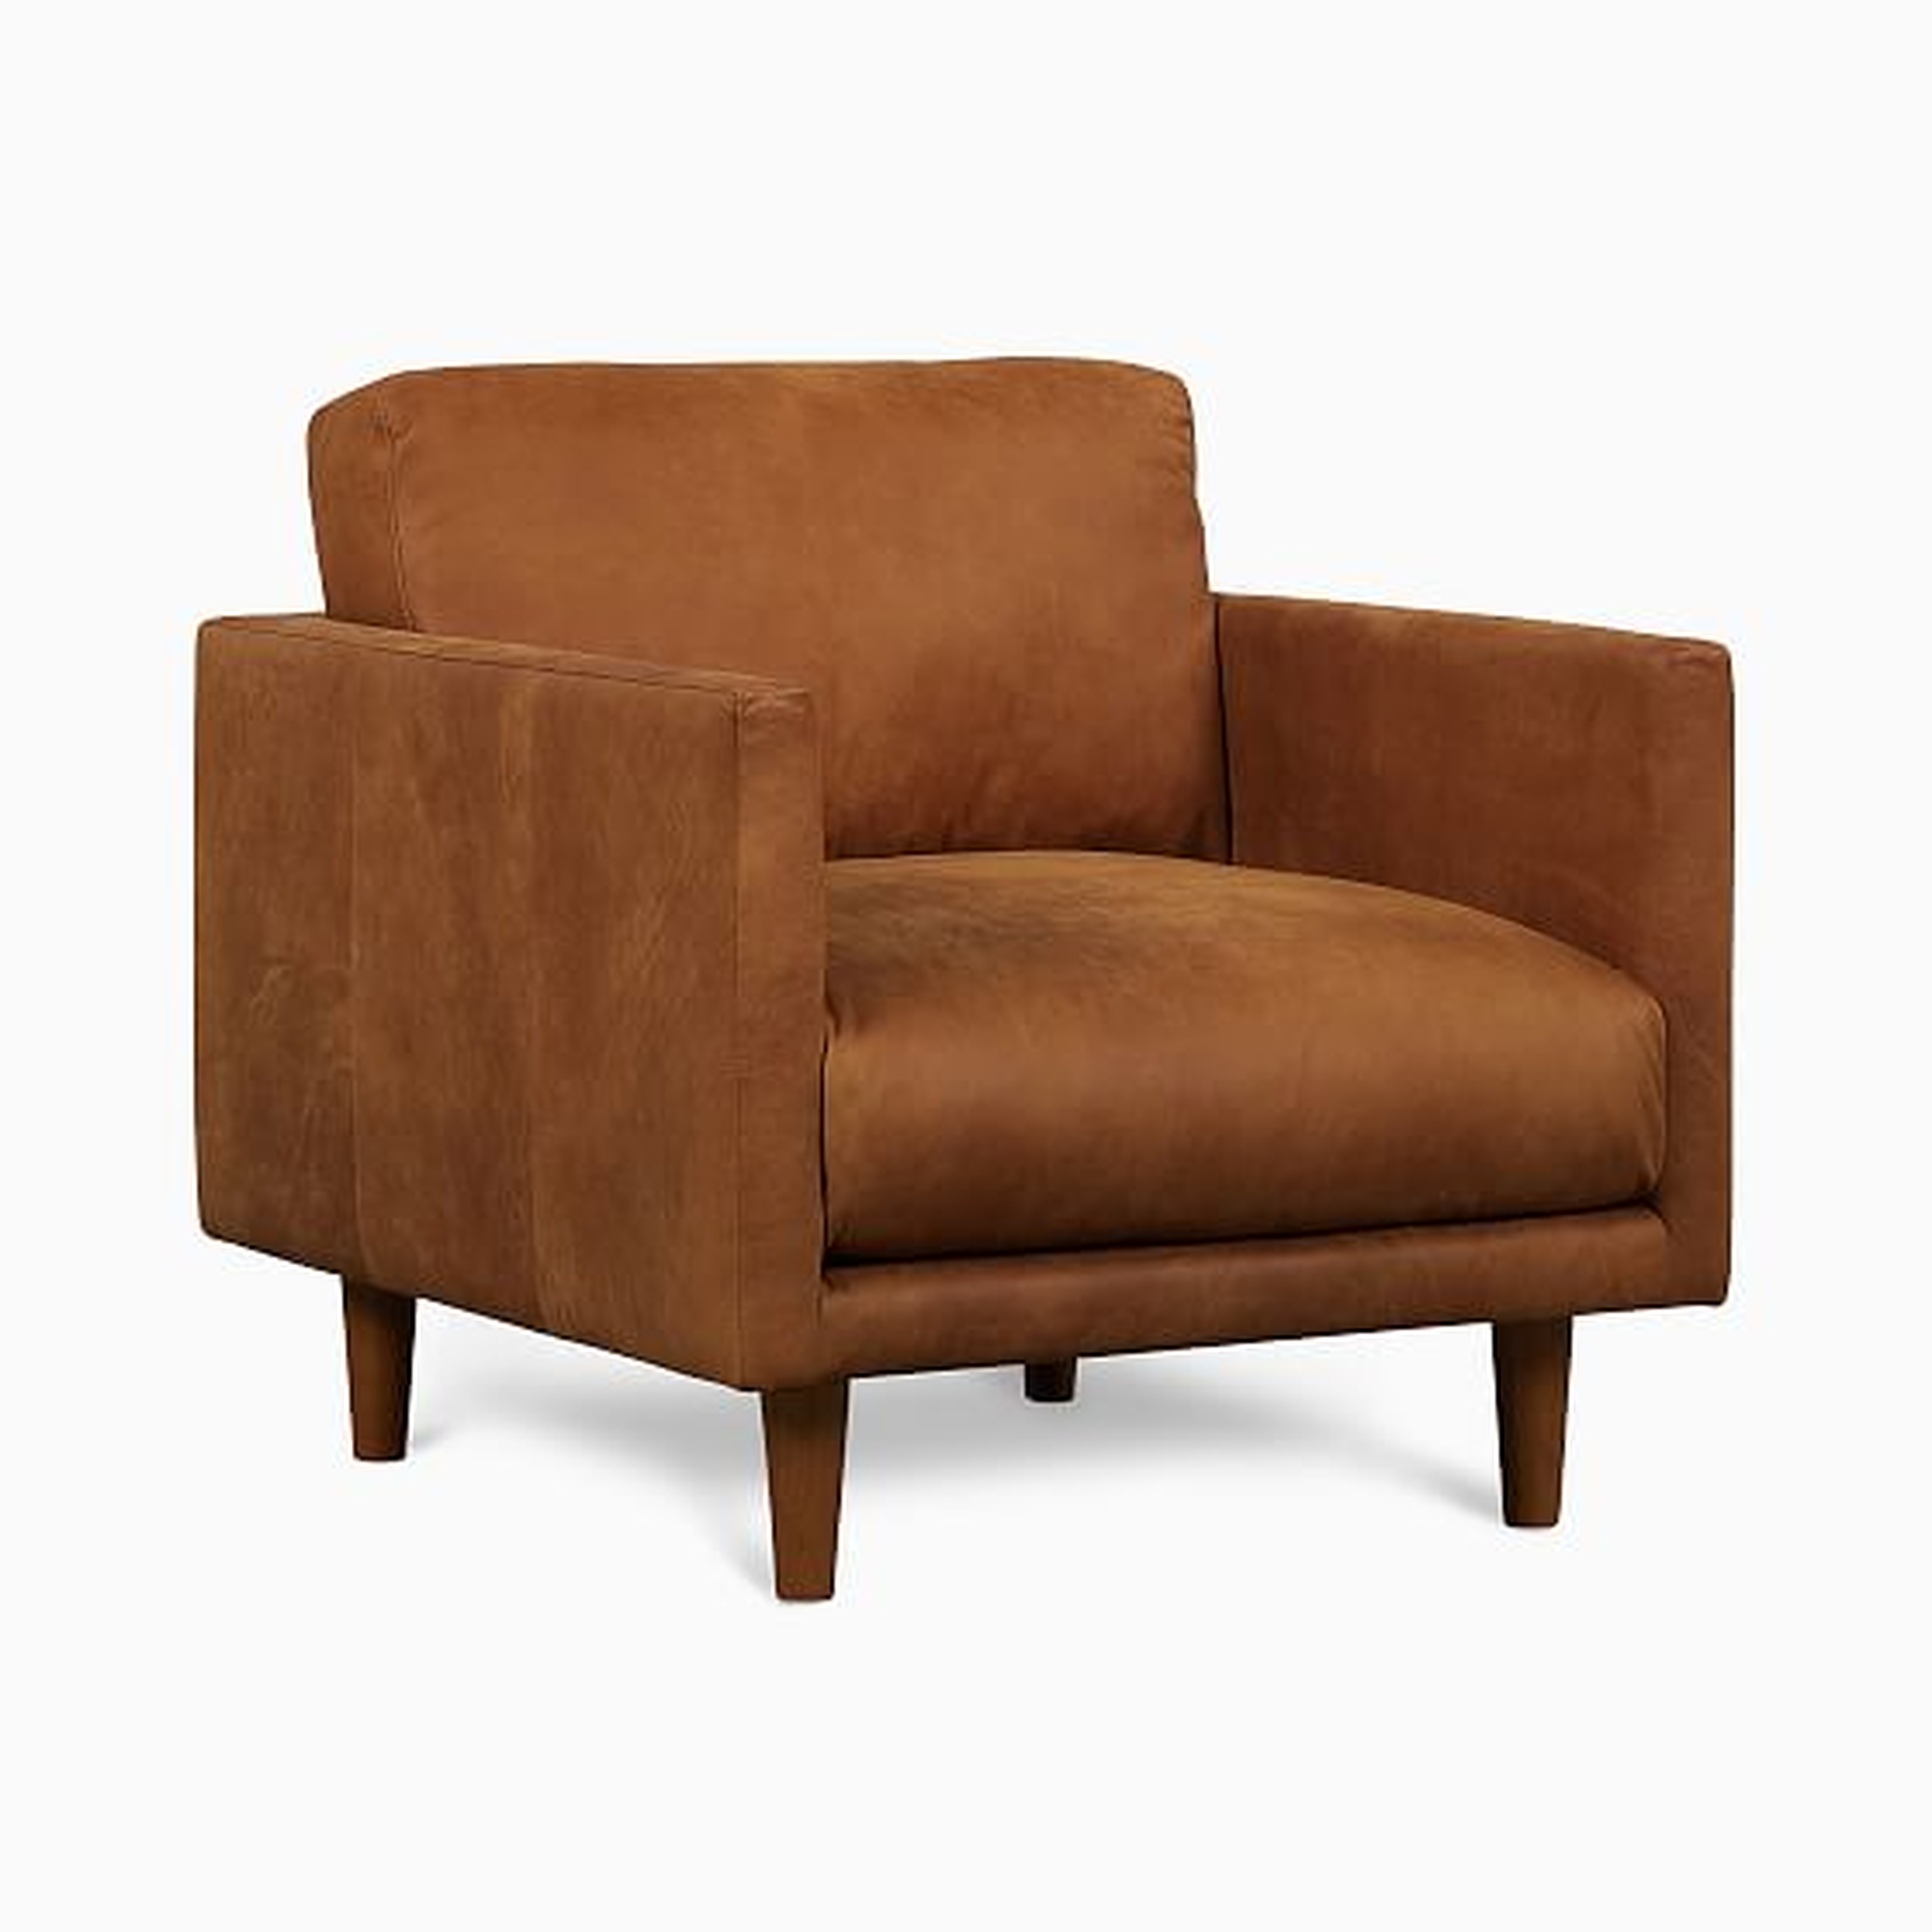 Rylan Chair Tan Outback Leather, Almond - West Elm